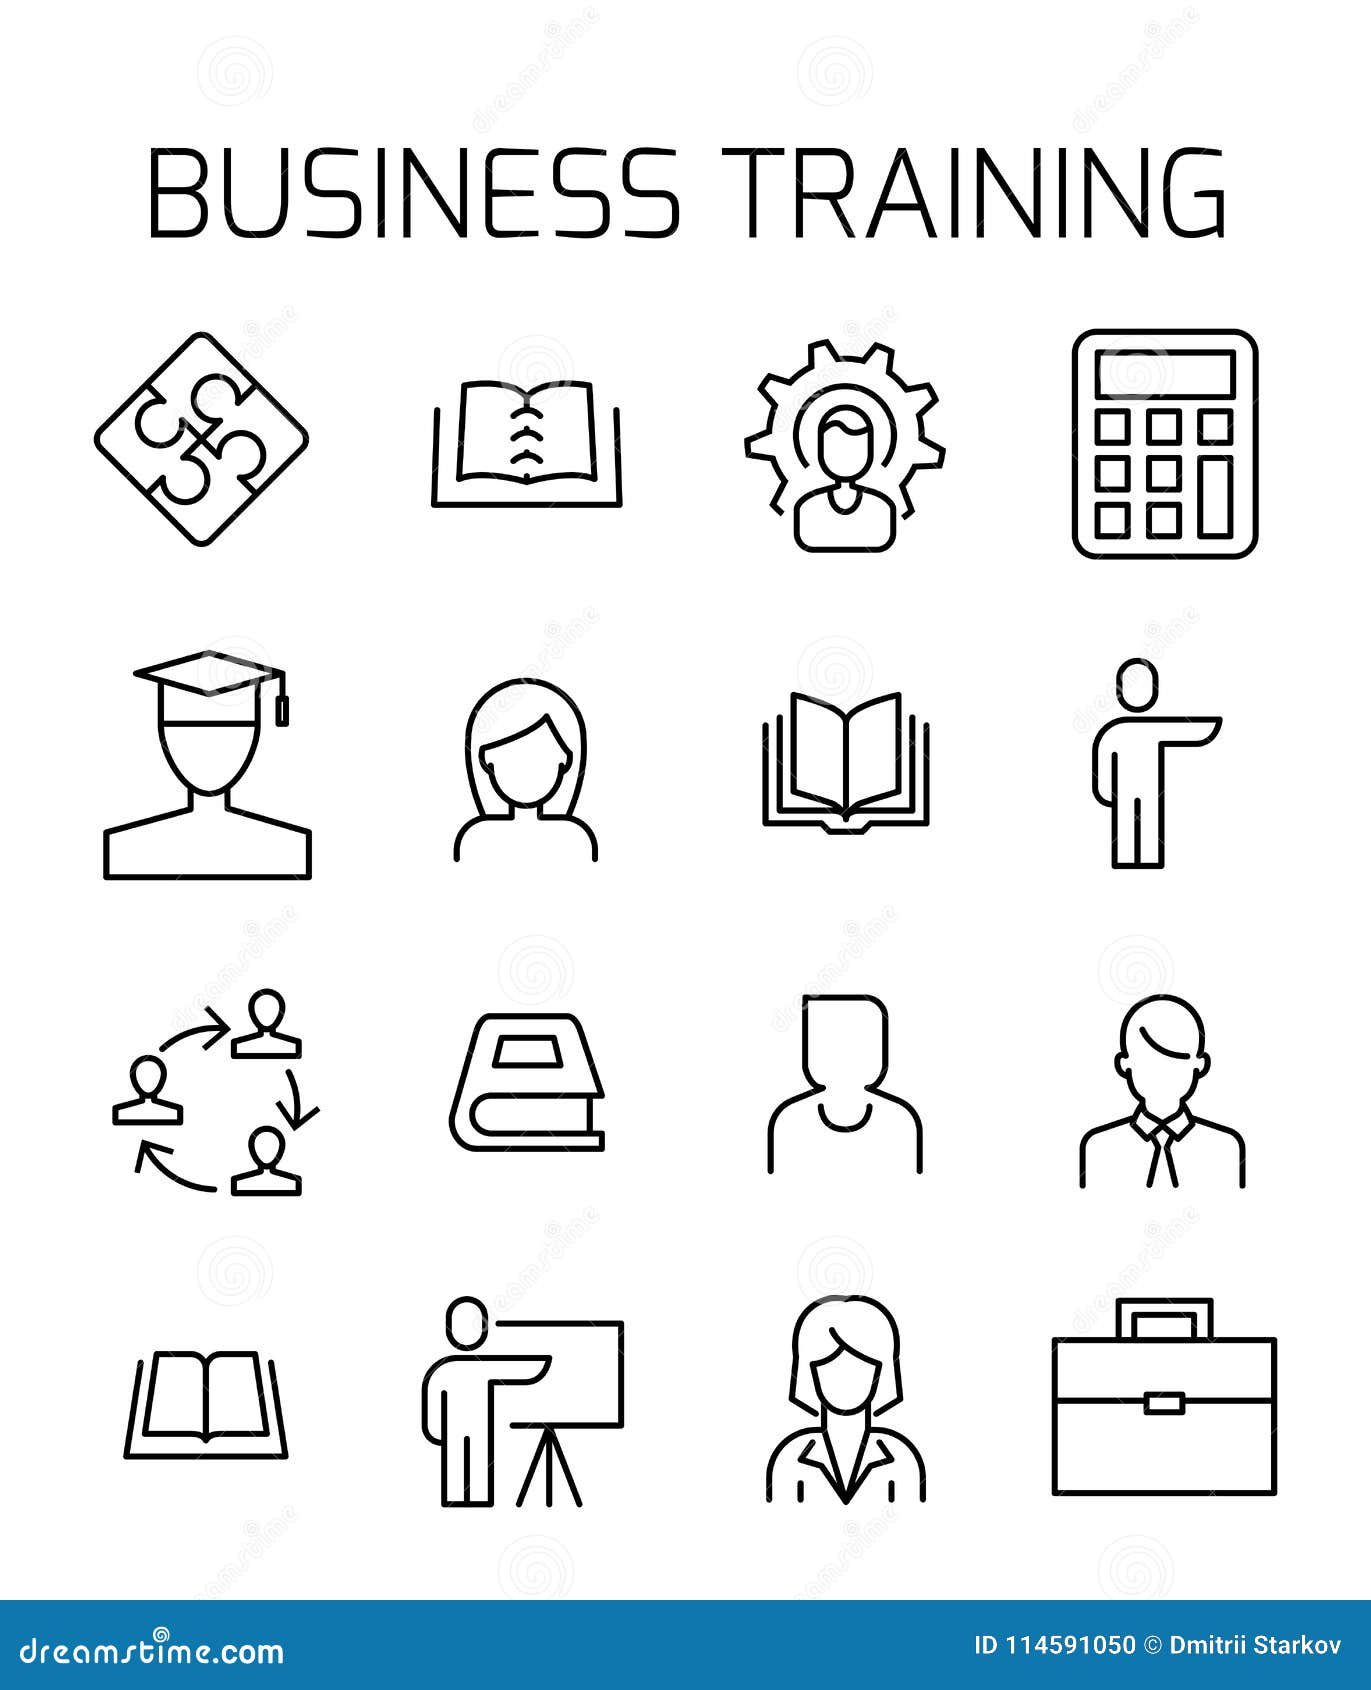 Business Training Related Vector Icon Set. Stock Vector